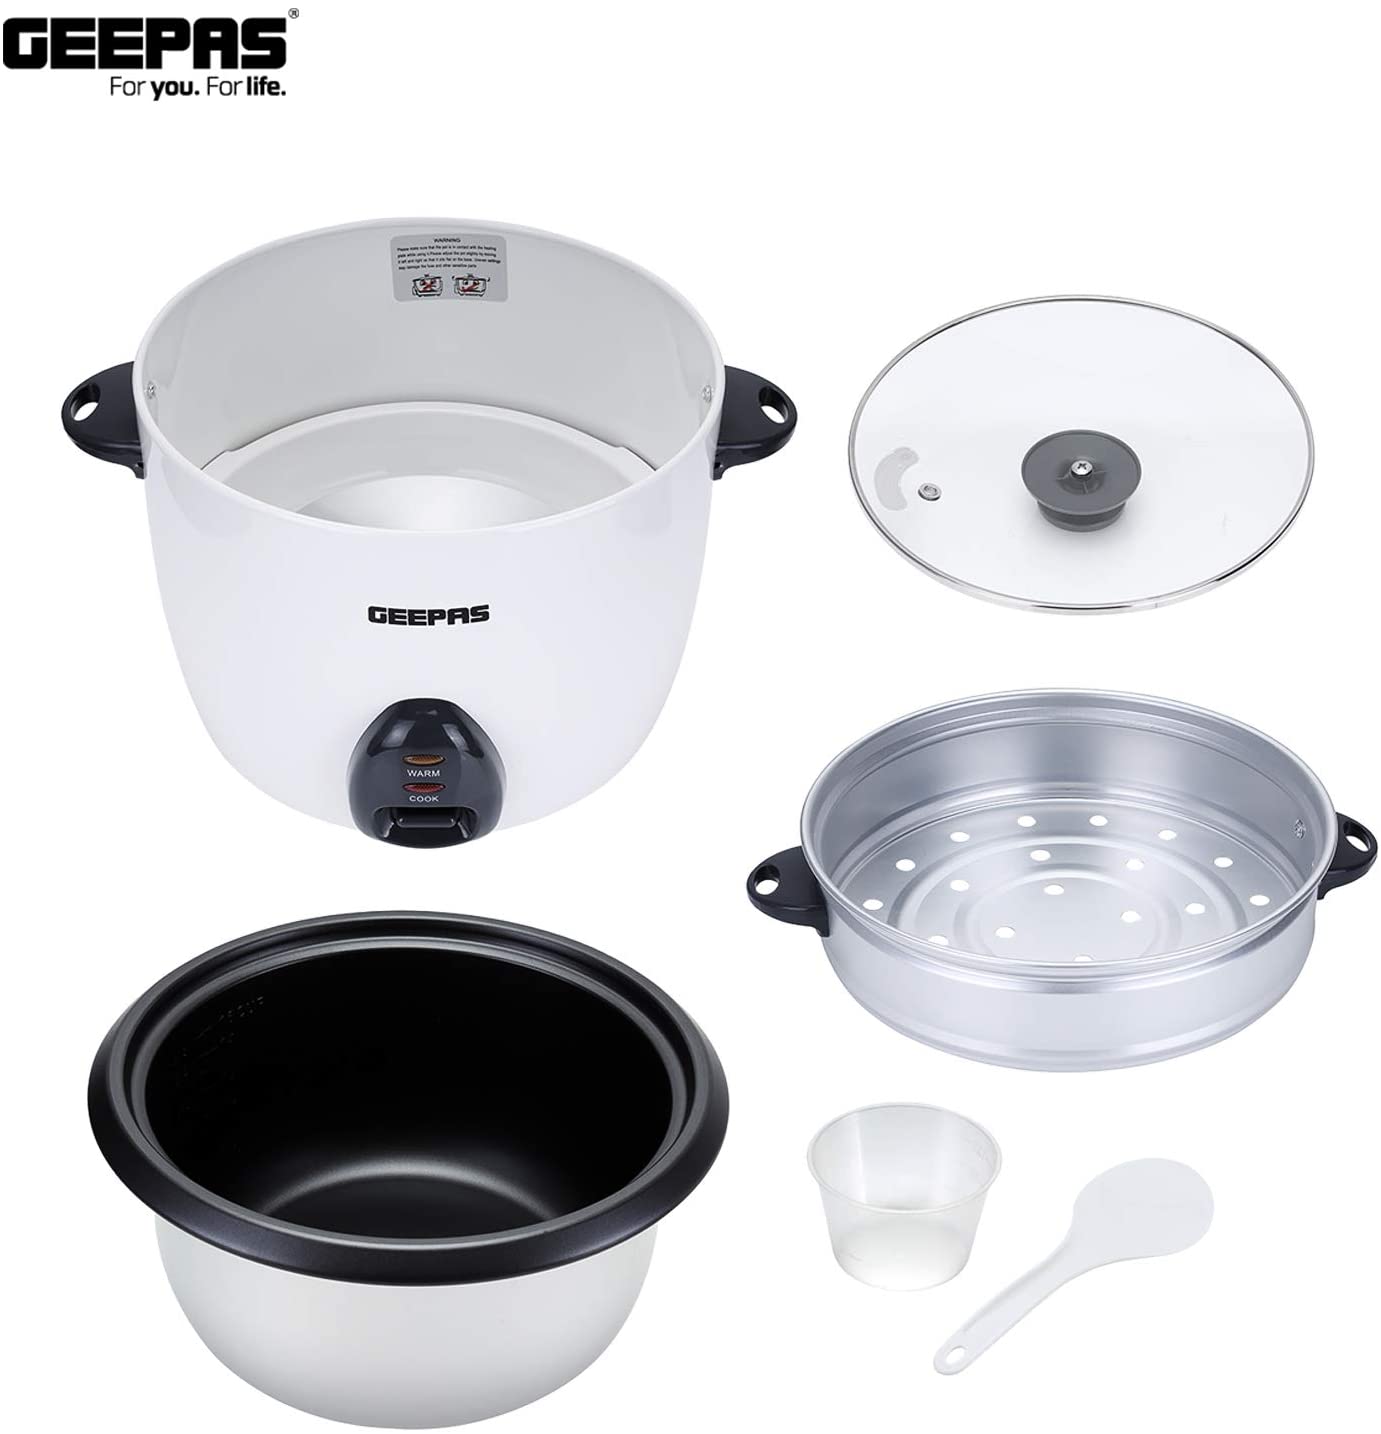 Geepas1.5L Rice Cooker Steamer With Non Stick Cooking Pot 500W